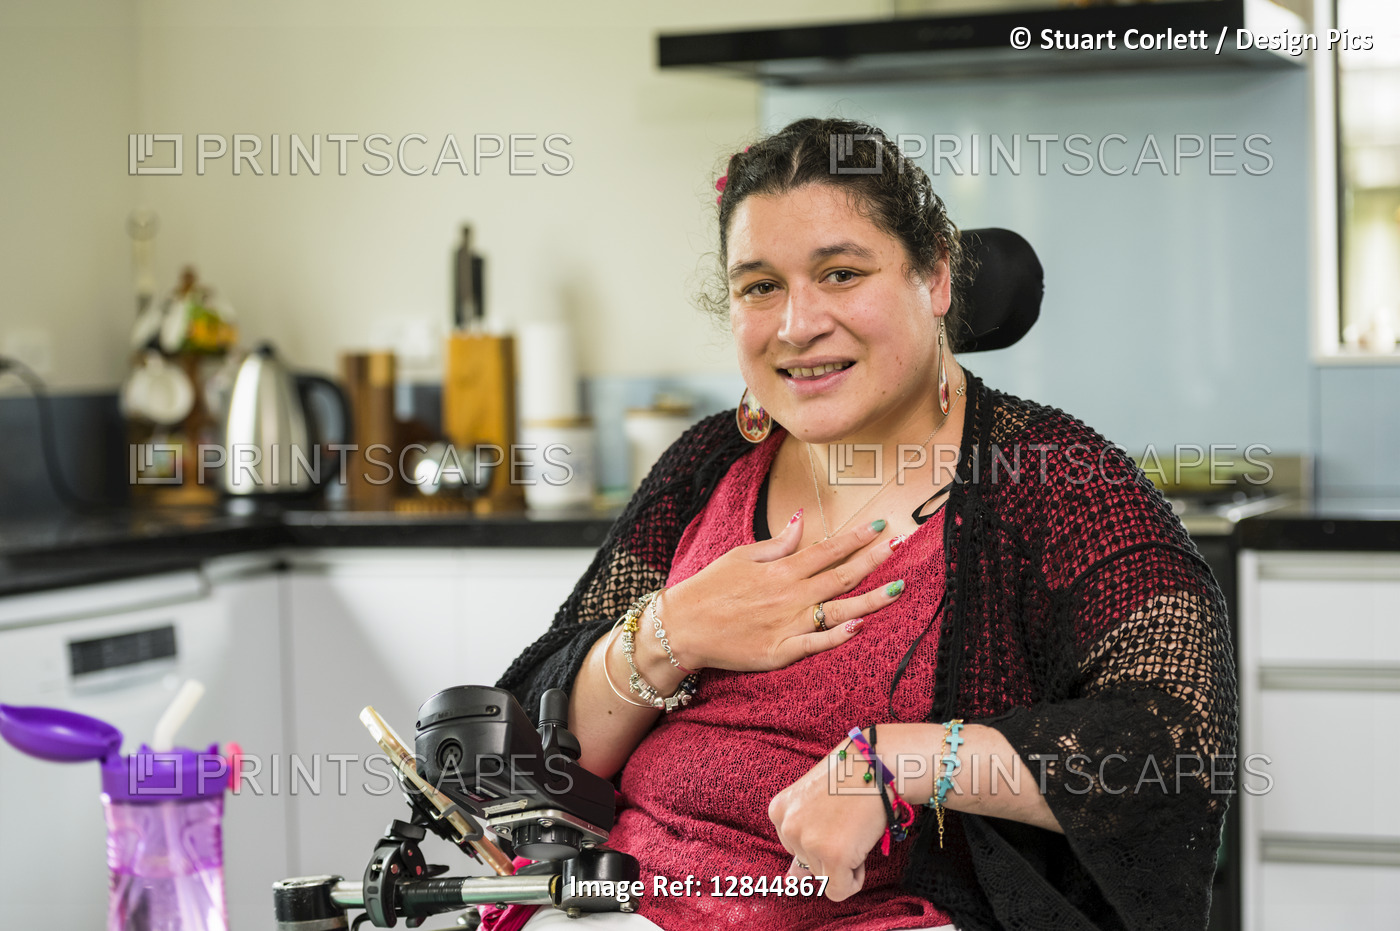 Maori woman with Cerebral Palsy in a wheelchair; Wellington, New Zealand